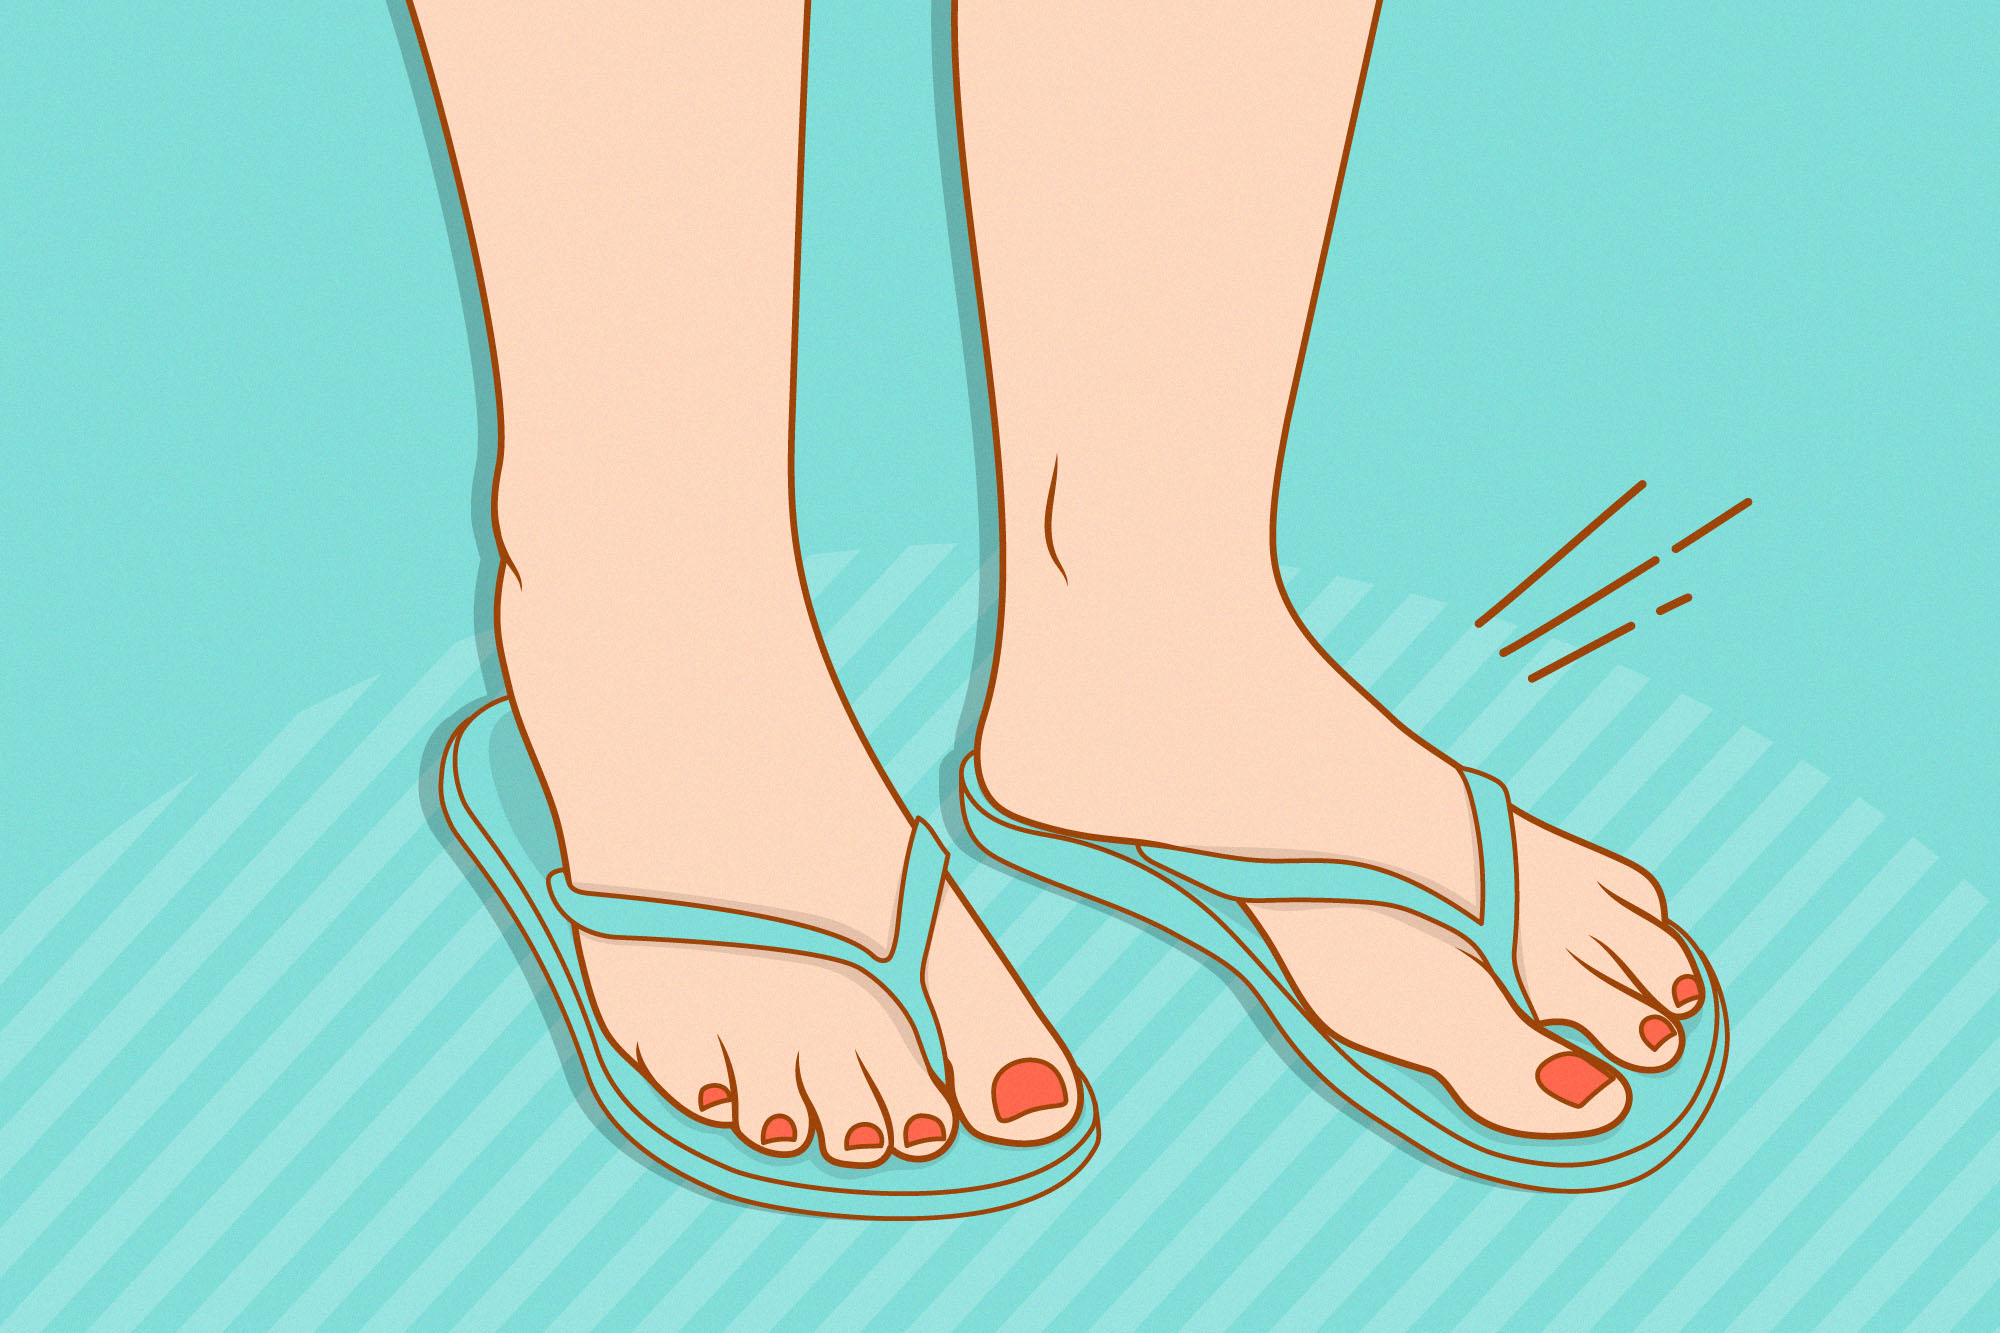 Are Flip Flops Really Bad For You? – Peterson Shoes